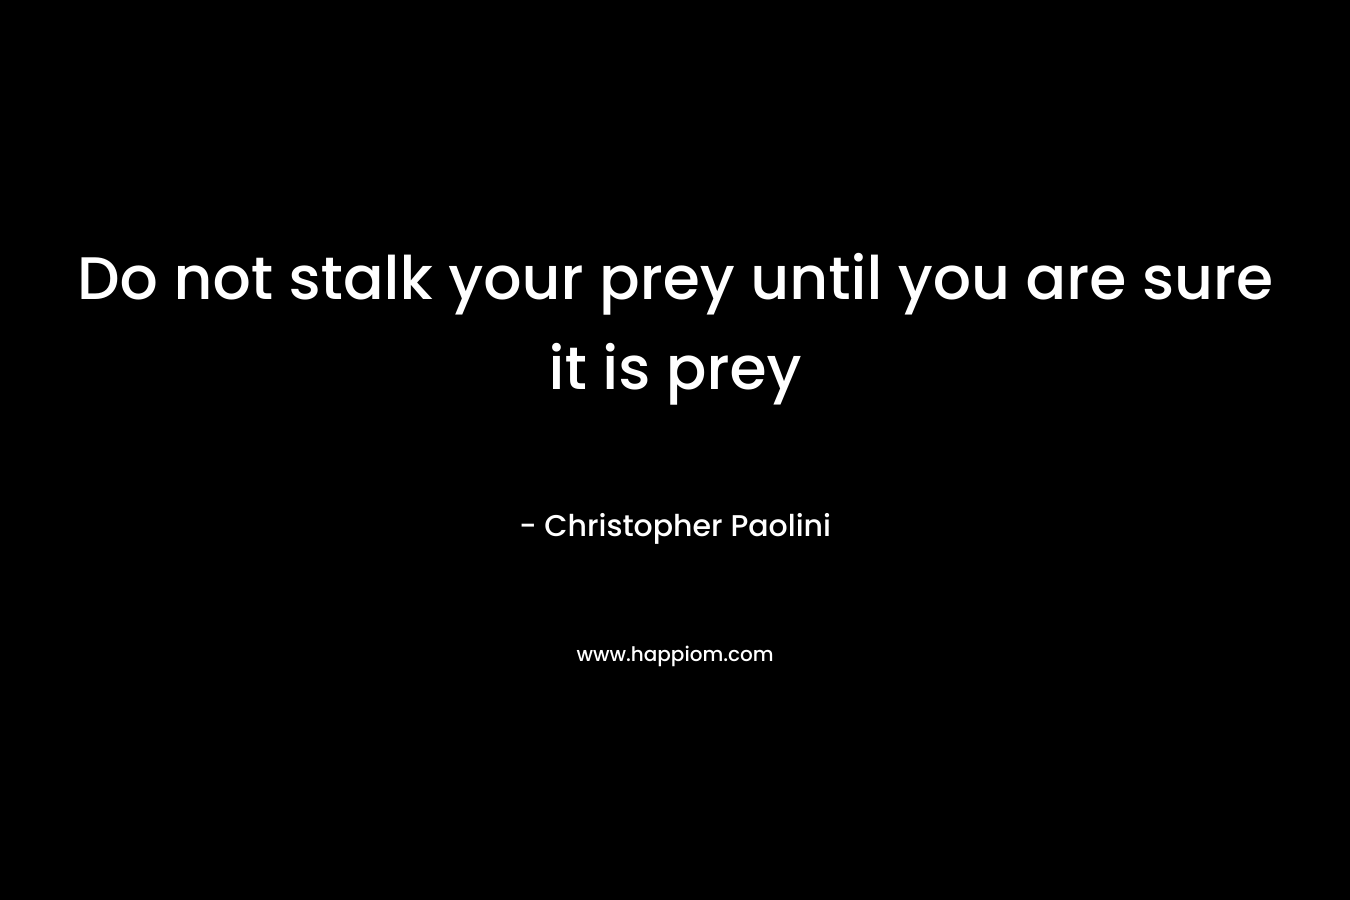 Do not stalk your prey until you are sure it is prey – Christopher Paolini